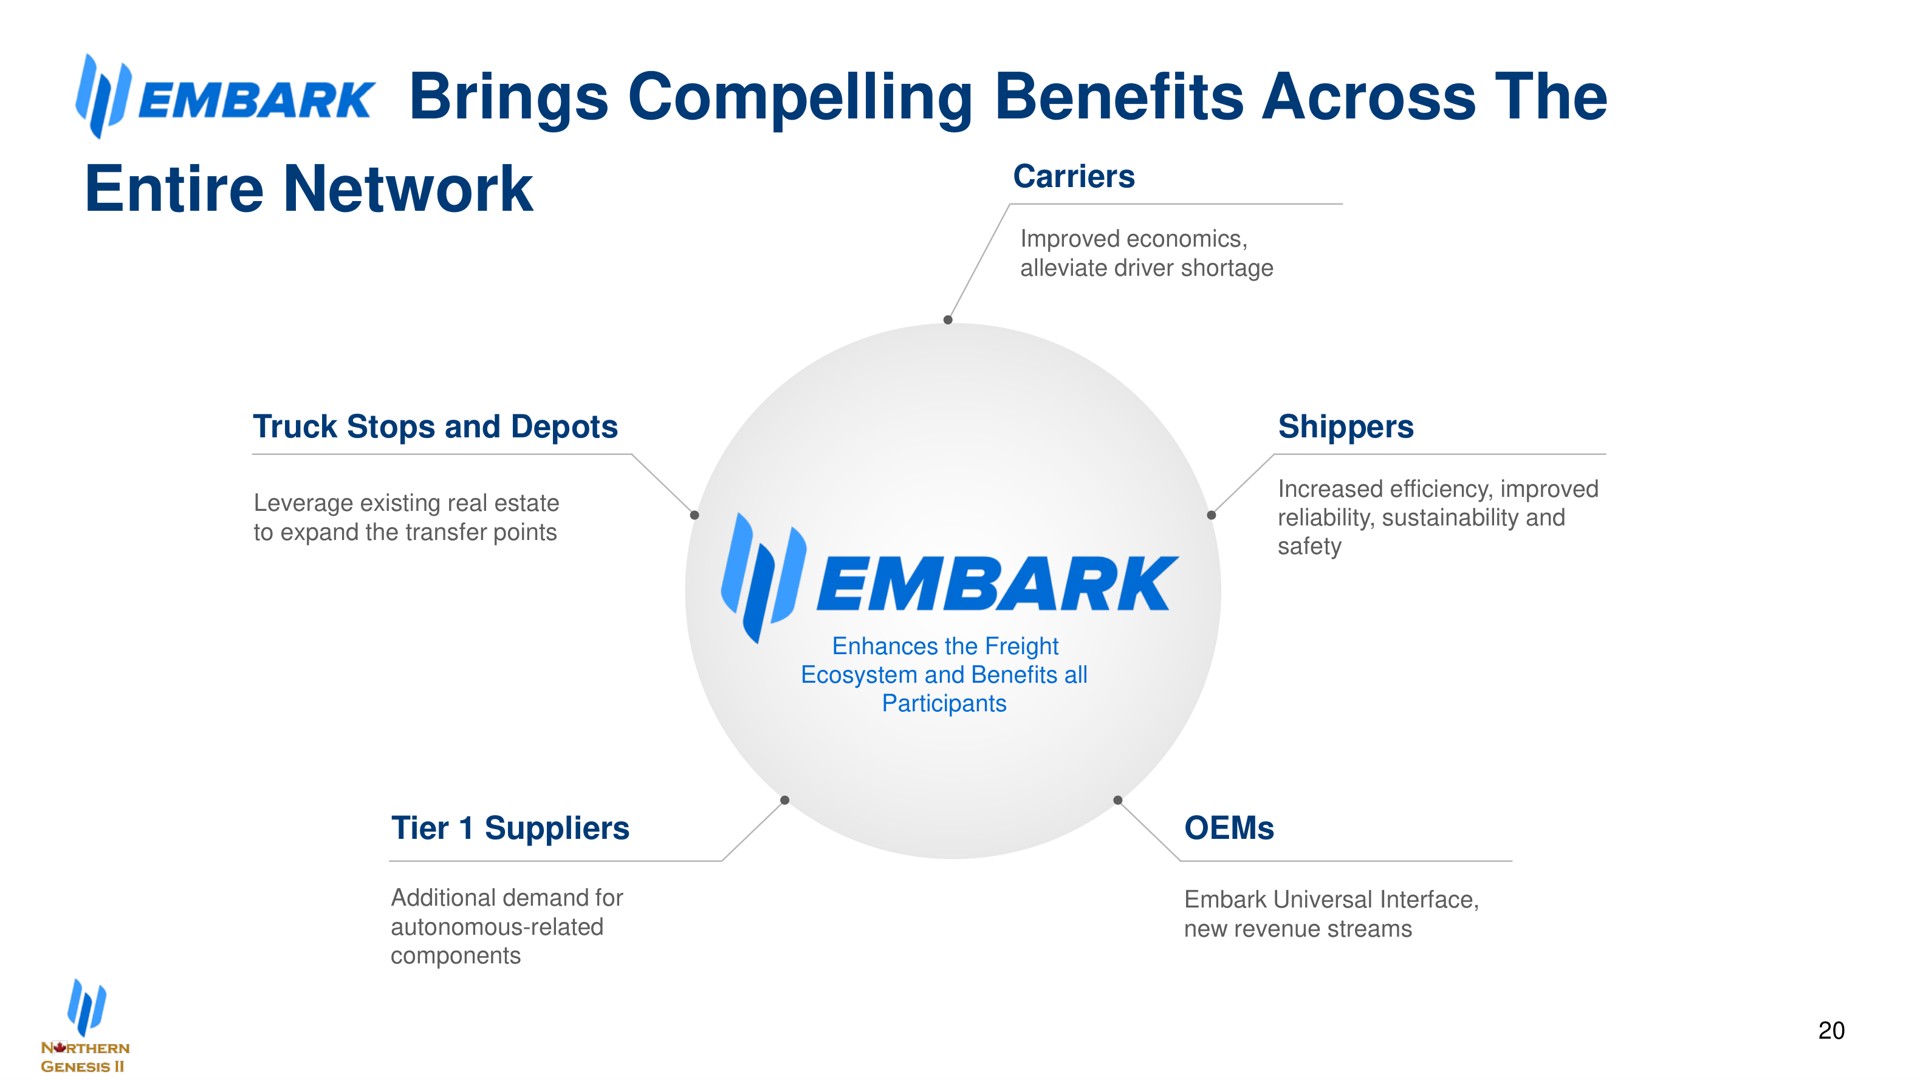 embark brings compelling benefits across the entire network | Embark